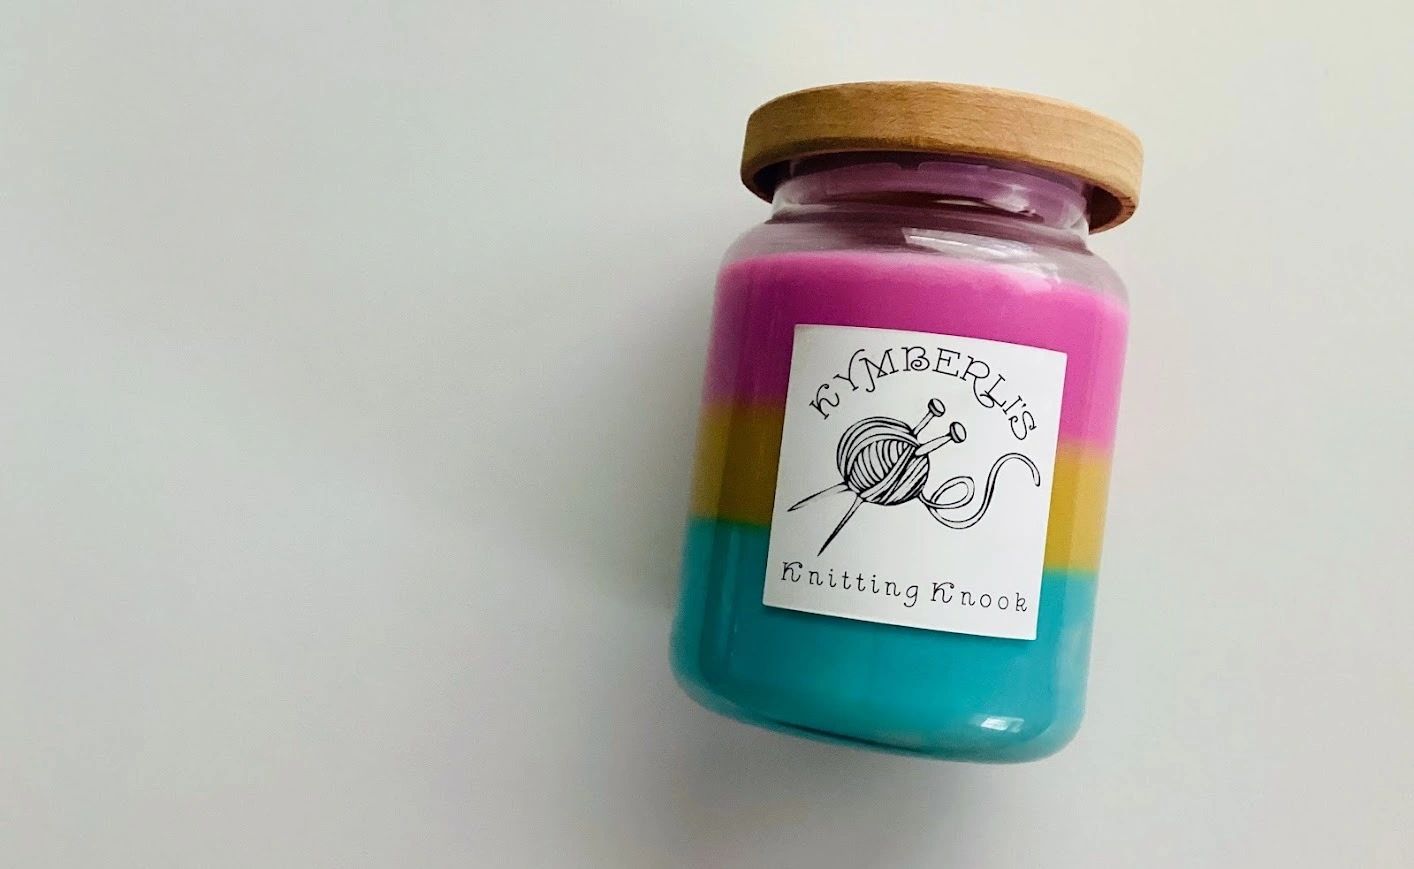 colorful custom luxury candle hand-poured by blackbird botanicals
